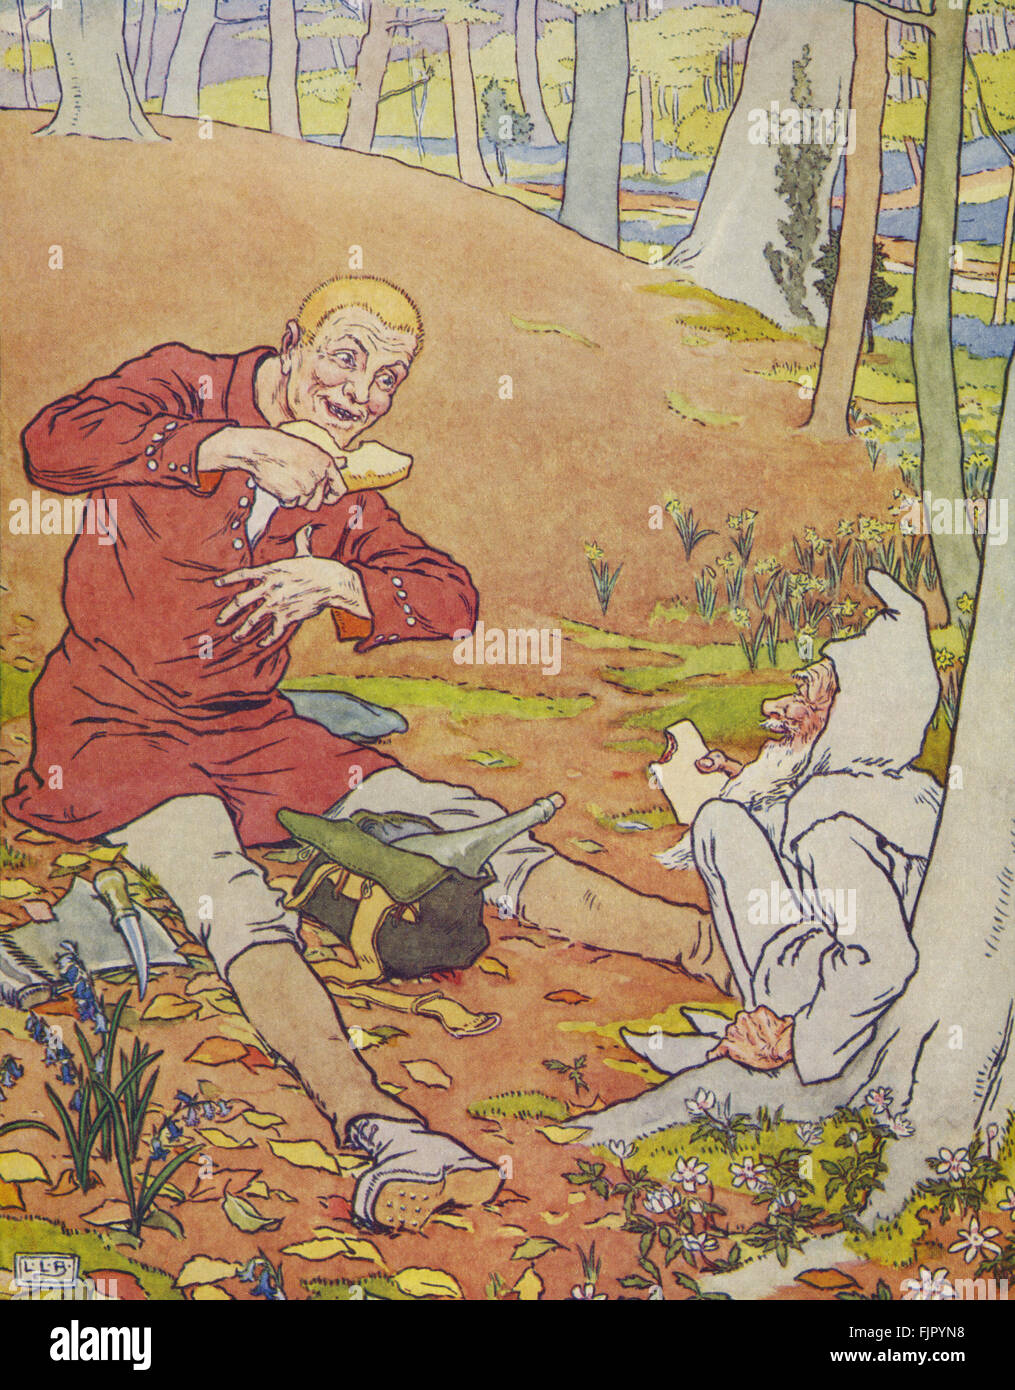 The Golden Goose - the Simpleton shares his food with the old man in the forest, 1905 illustration by Leonard Leslie Brooke (1862 - 1940) Stock Photo